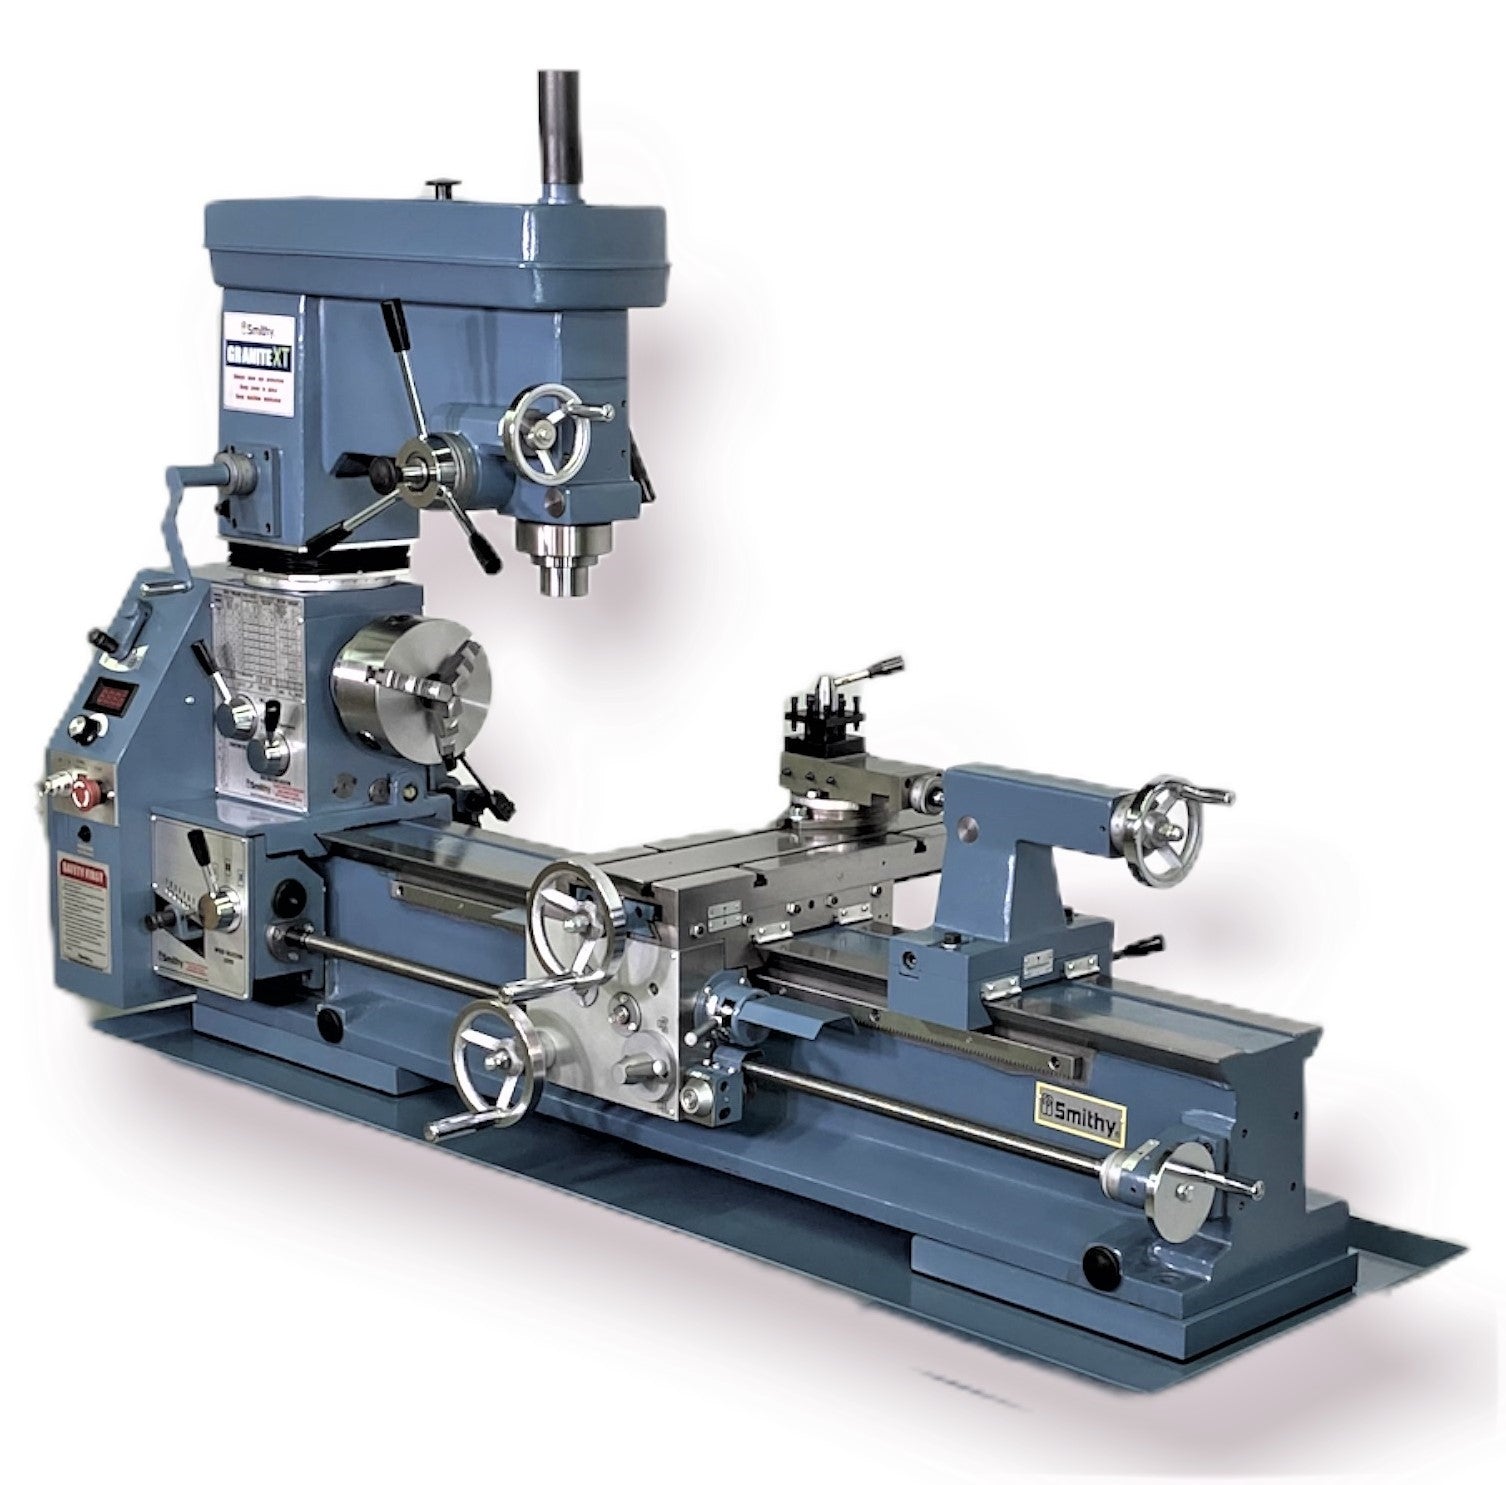 is lathe a mill? 2